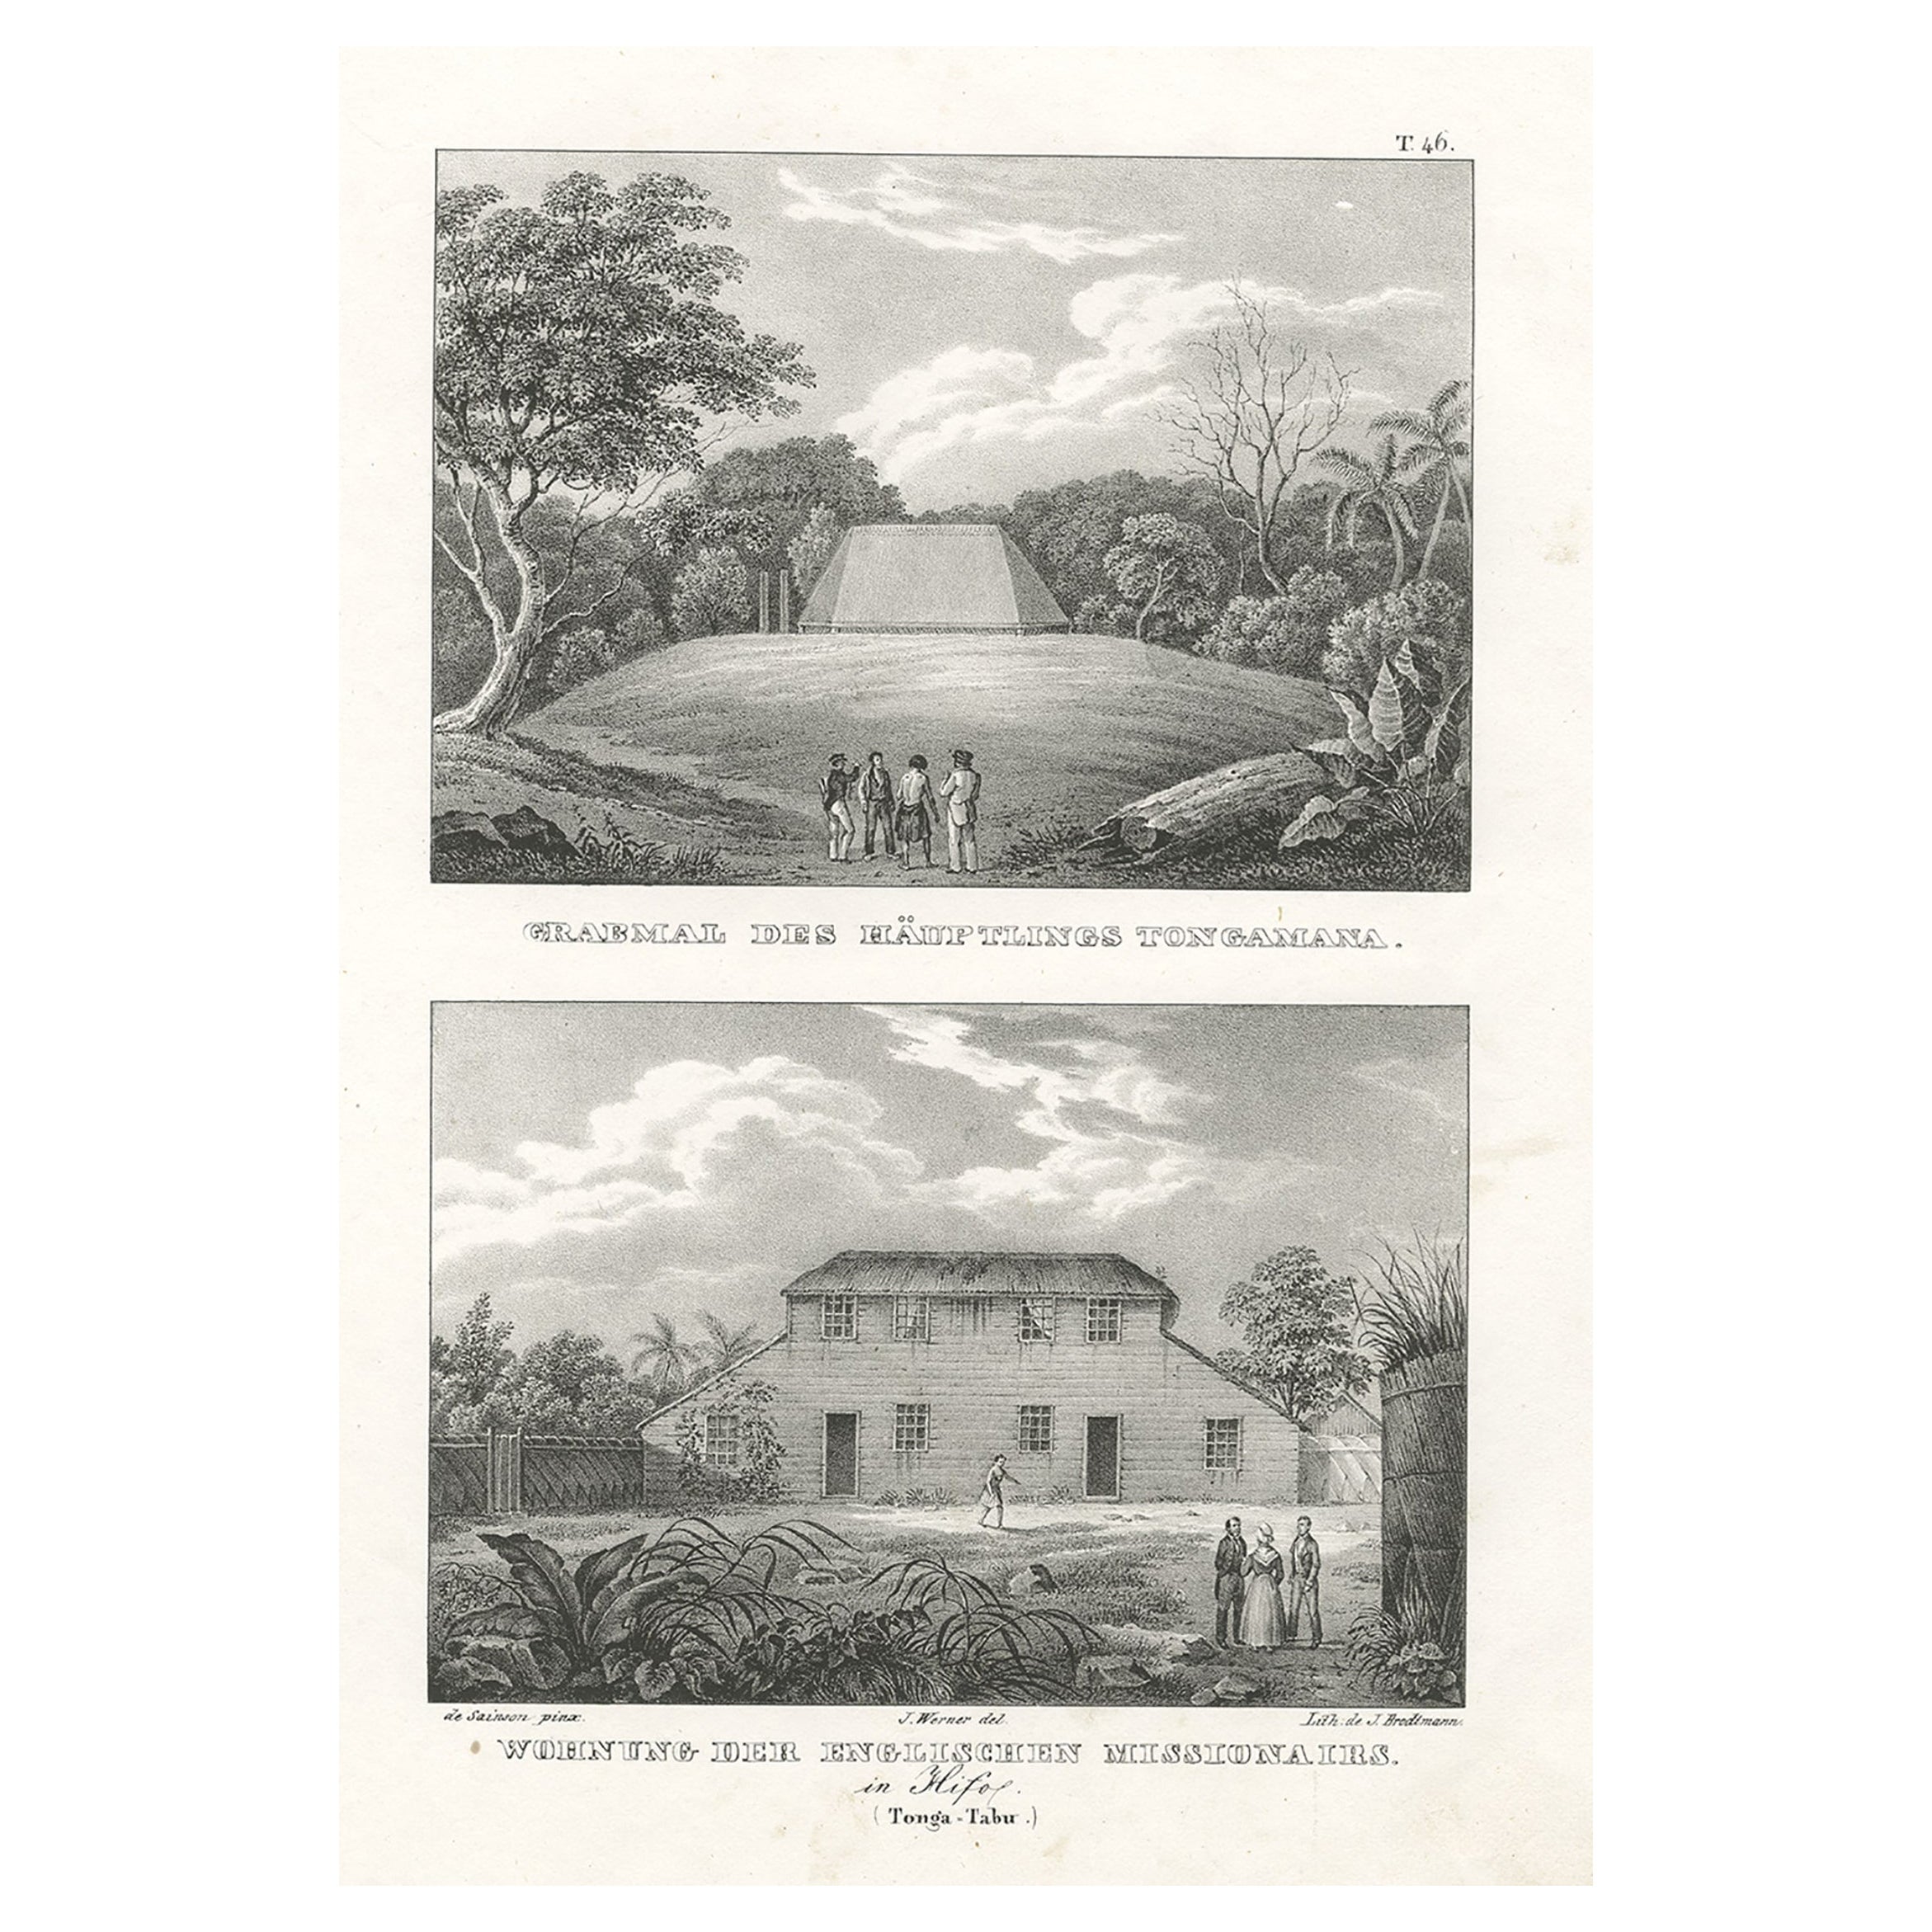 Residence of English missionaries in Hihifothe & Tomb of Tongamana, Tonga, 1836